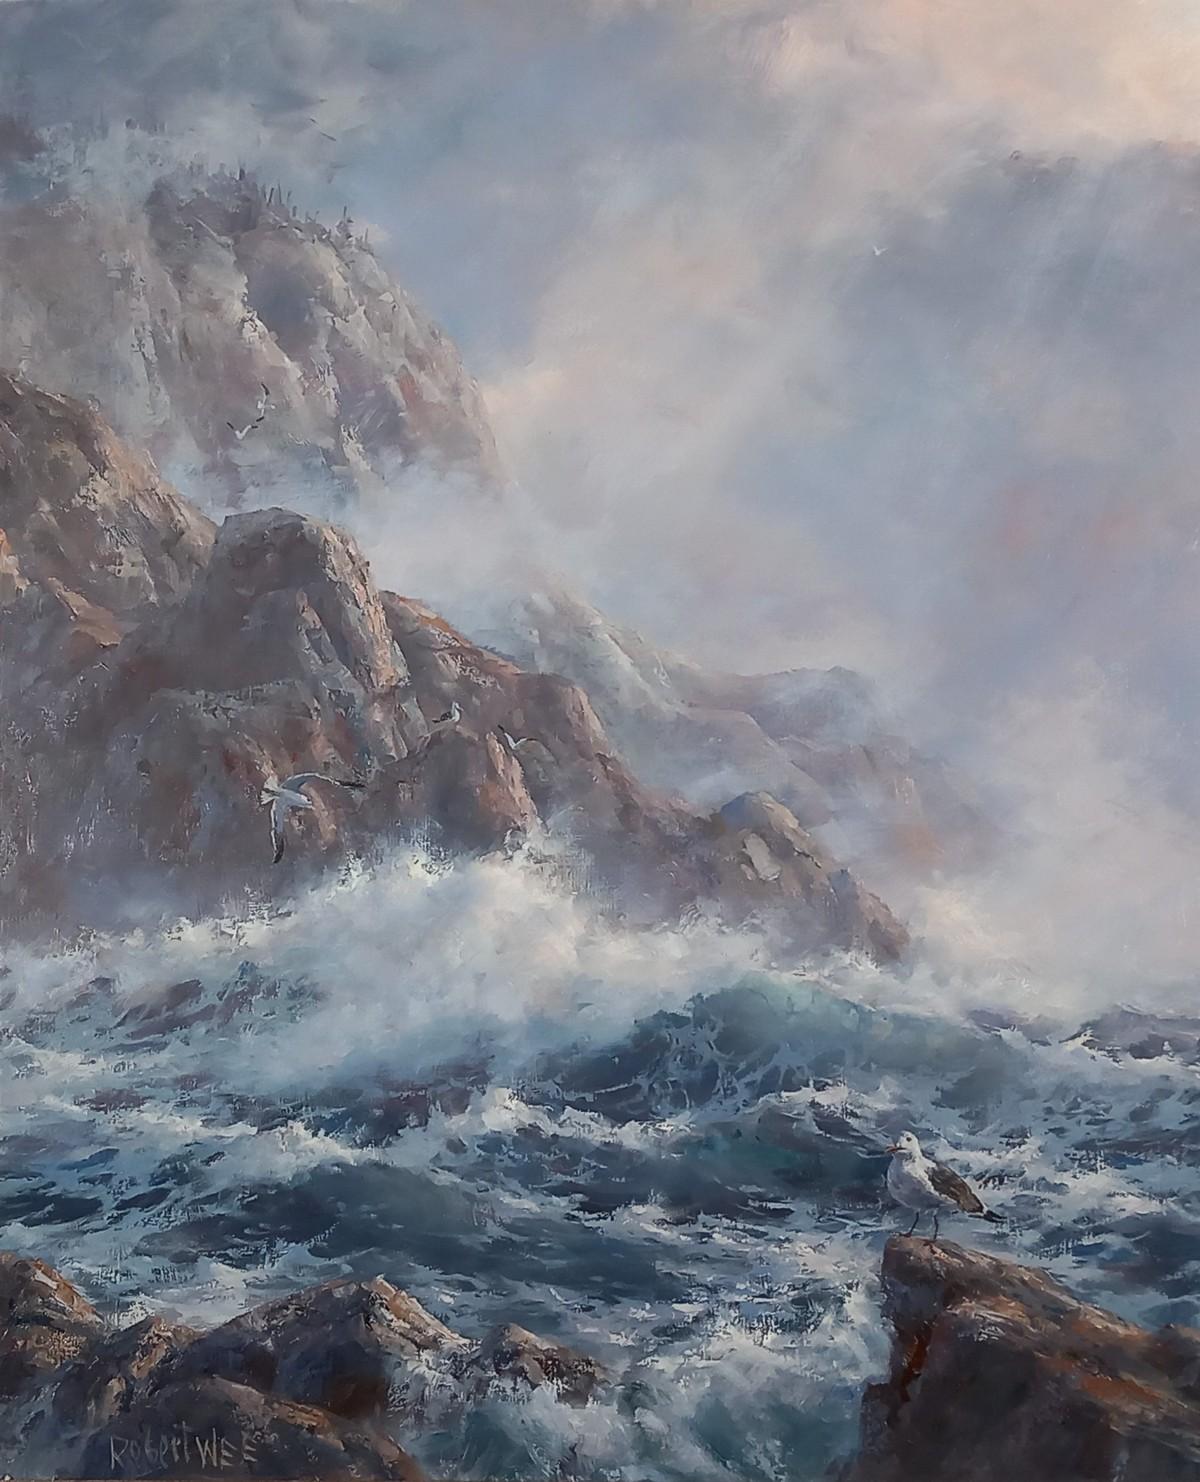 Robert Wee Landscape Painting - Crashing Waves on the Rocks   Seascape Oil Painting